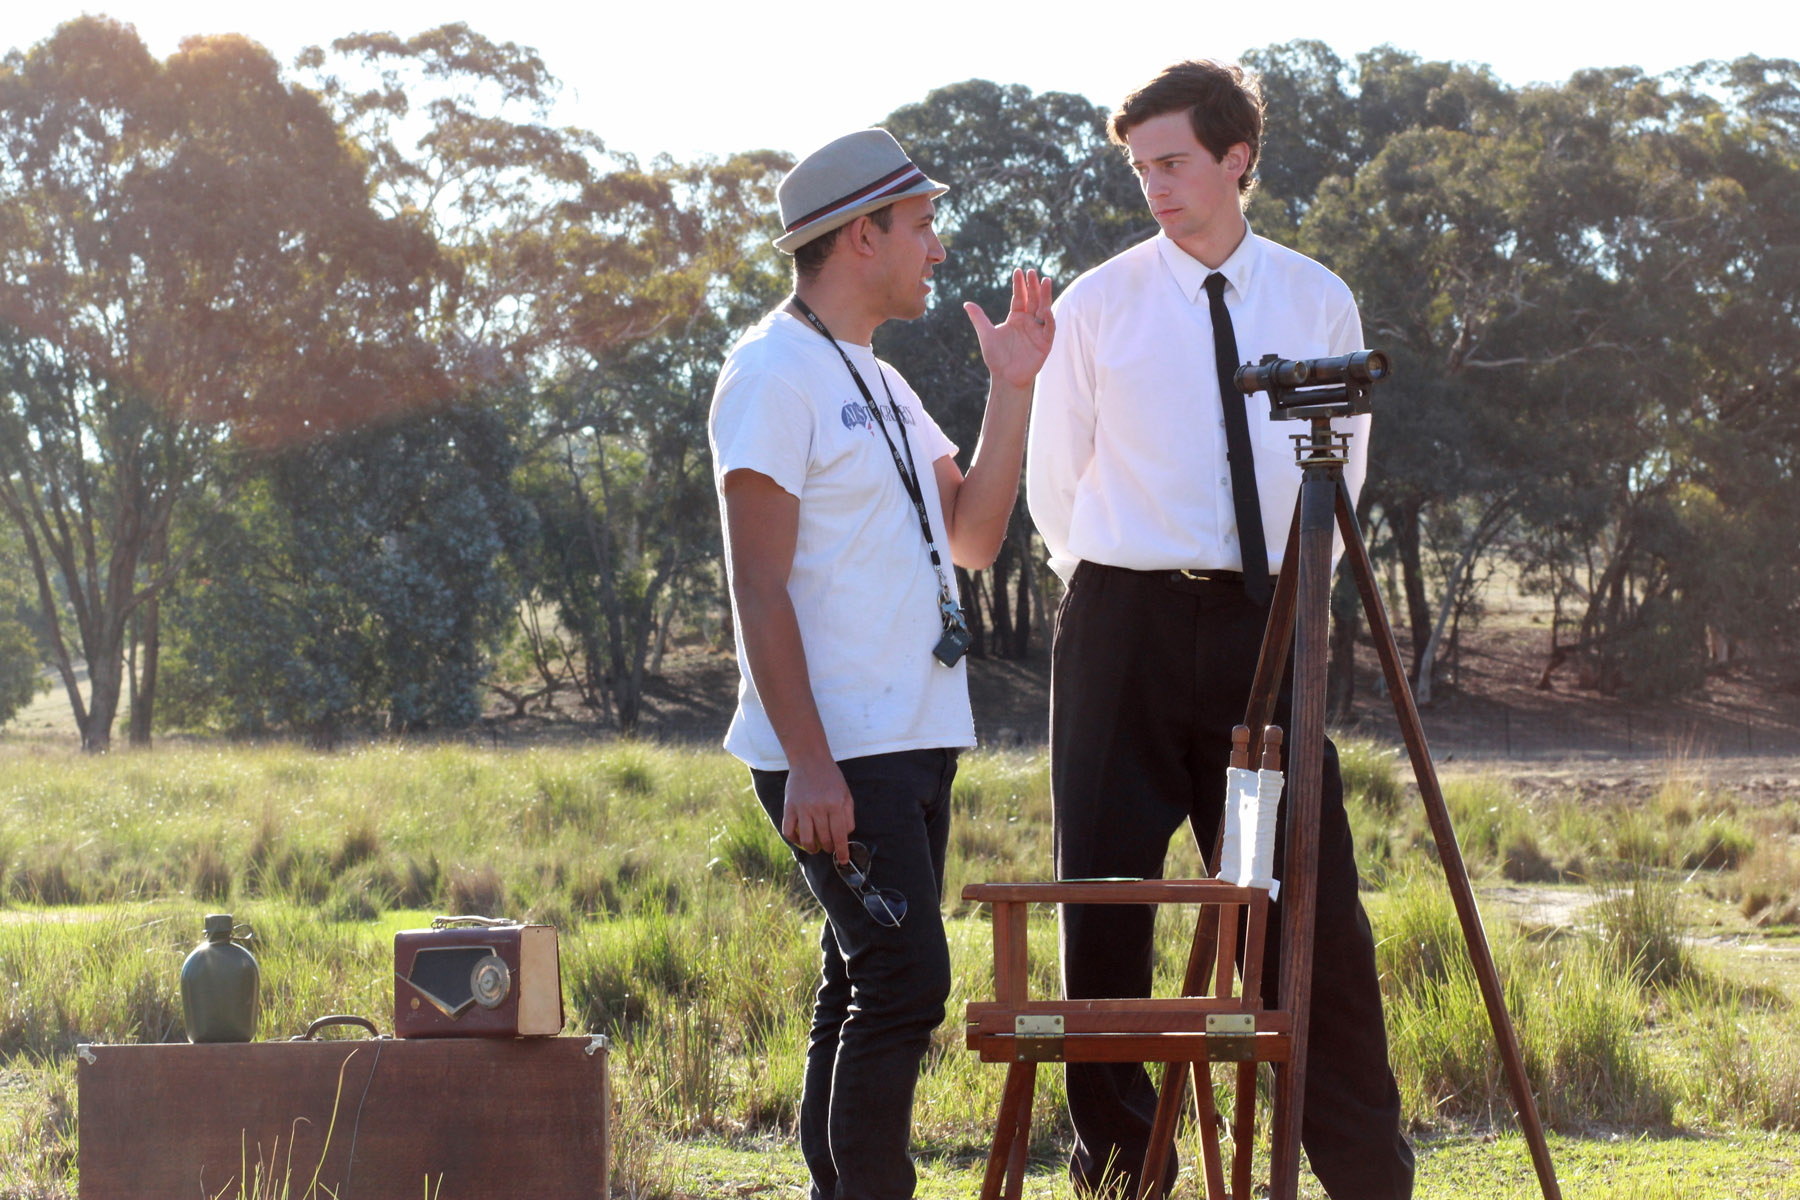 Producer/Director Justin Bush and Actor Miles Harrison rehearse a scene.